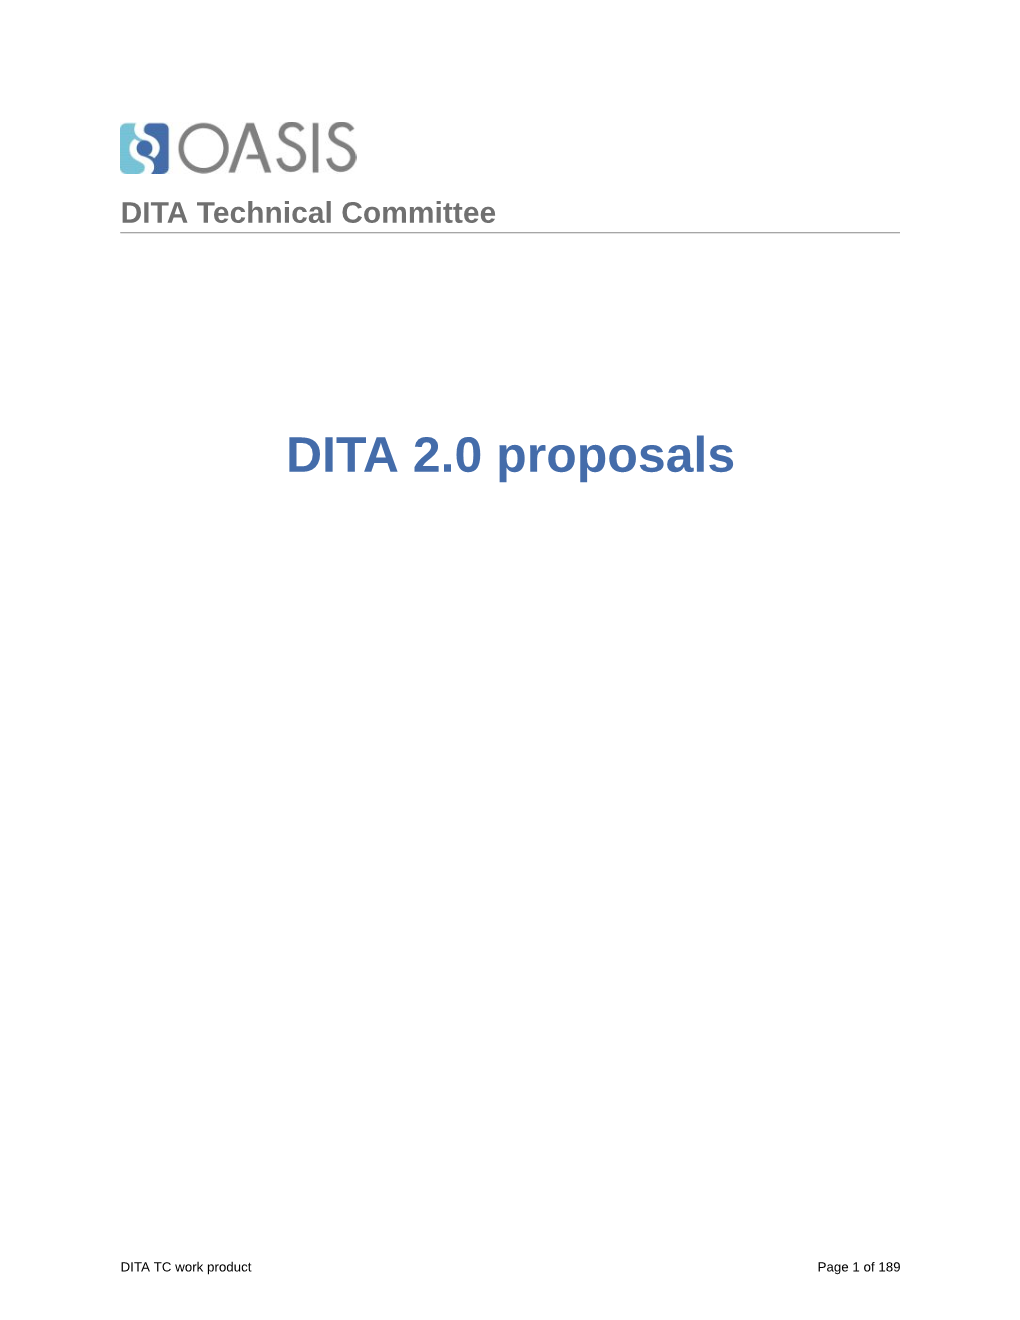 Approved DITA 2.0 Proposals